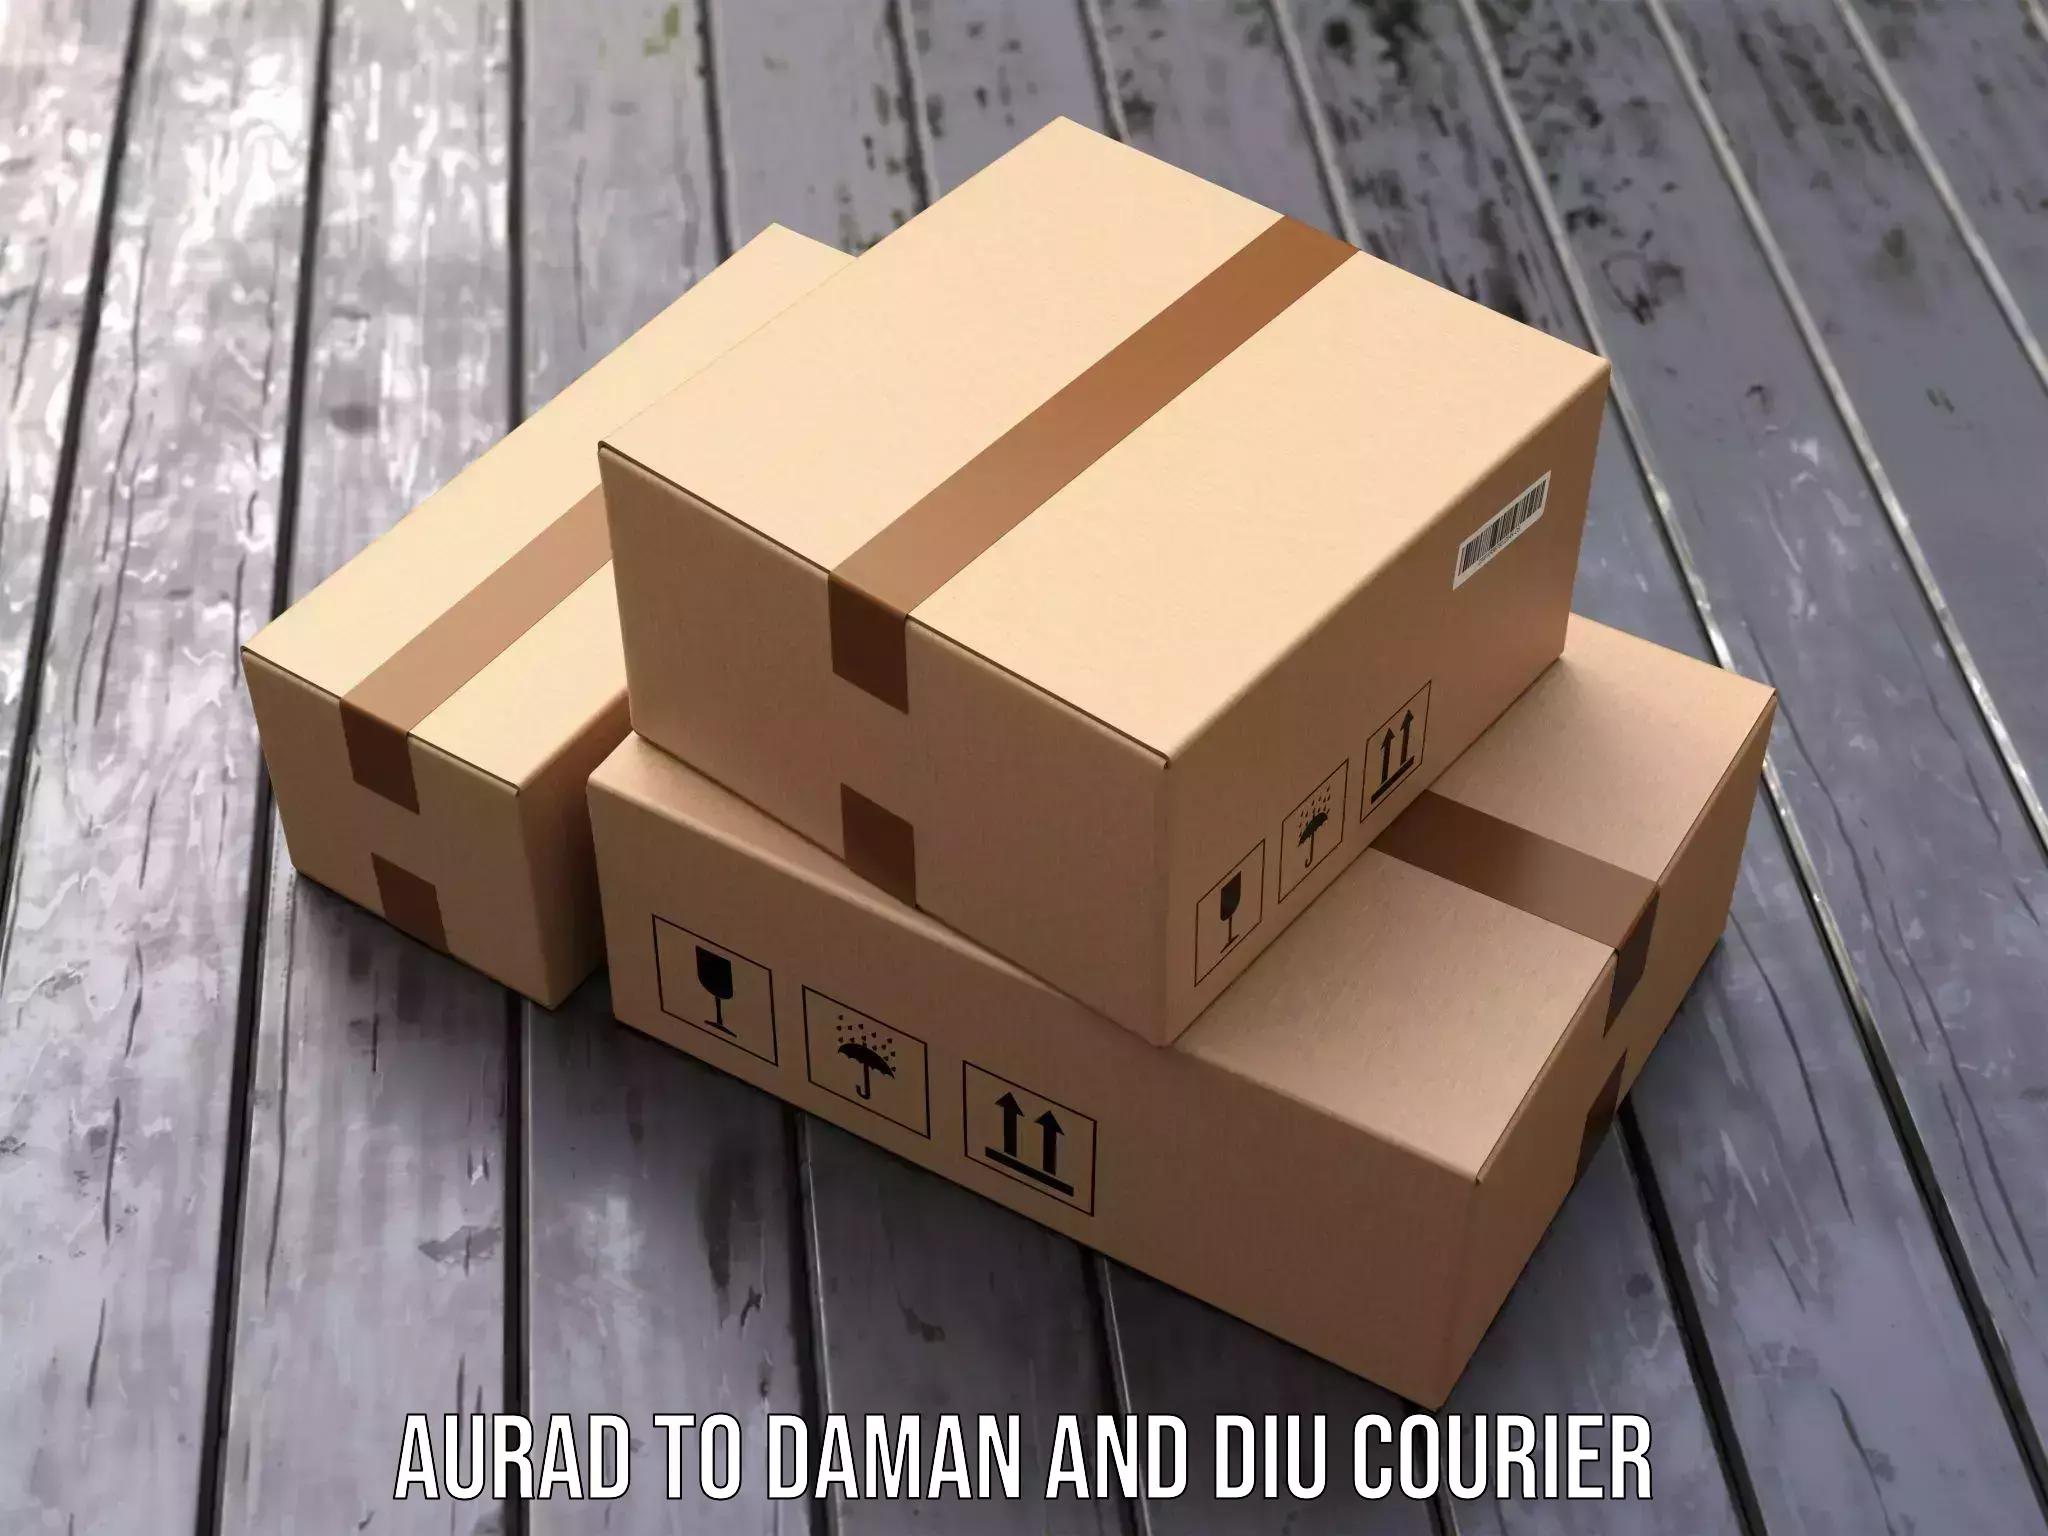 Reliable delivery network Aurad to Diu